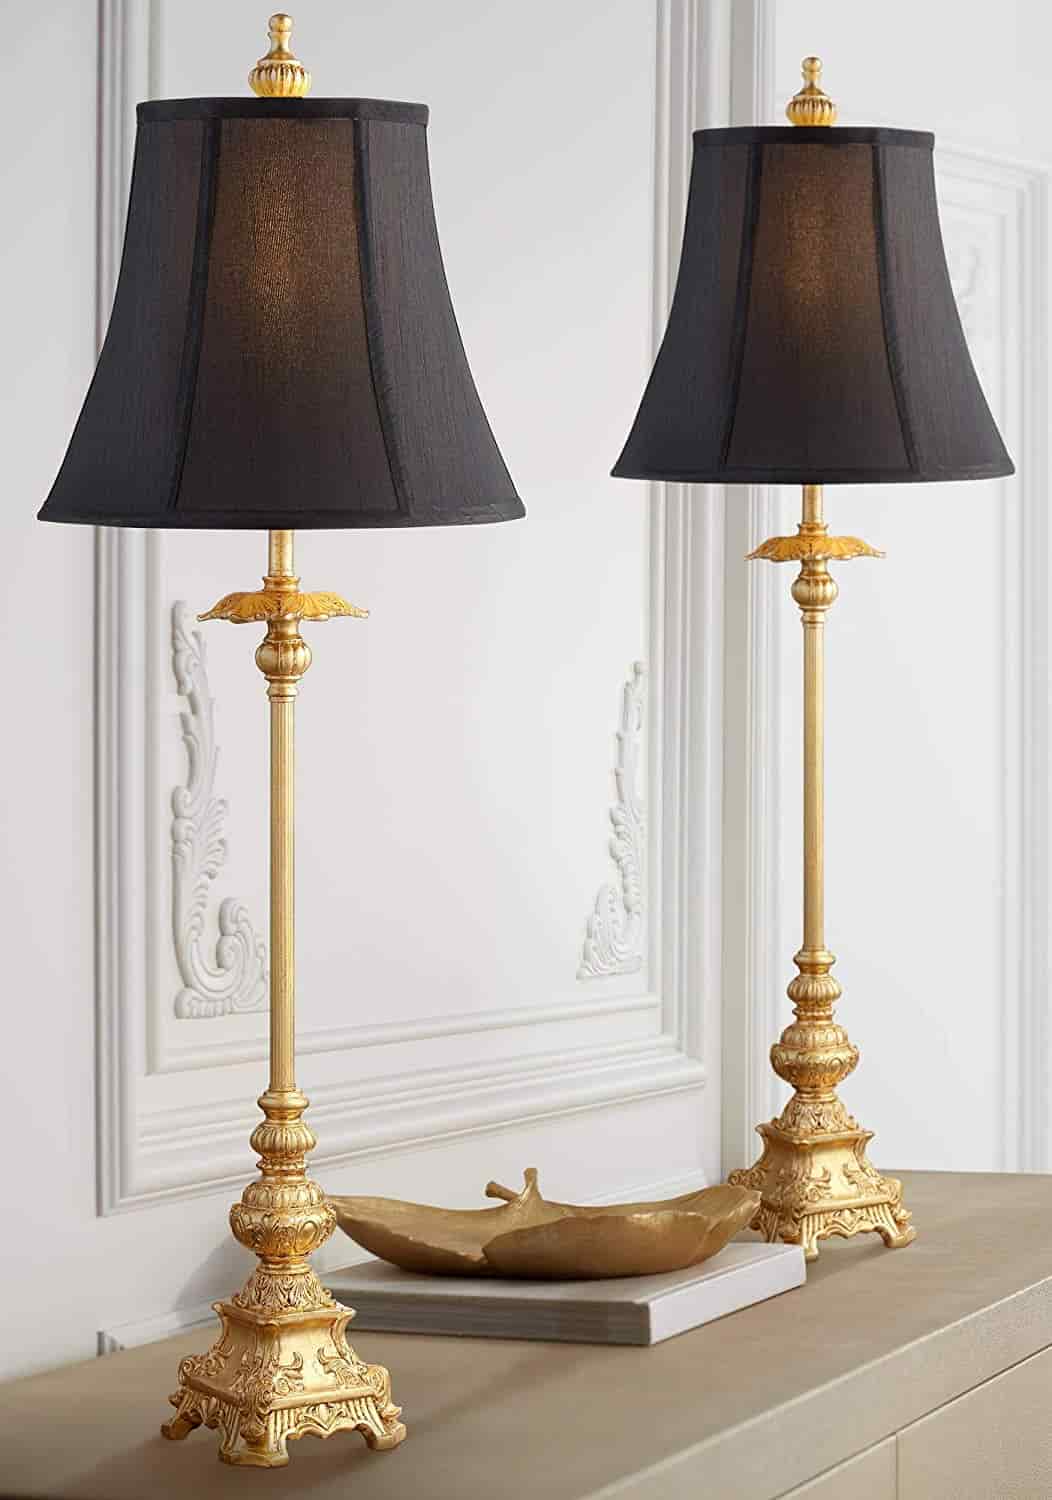 How Tall Should Buffet Lamps Be